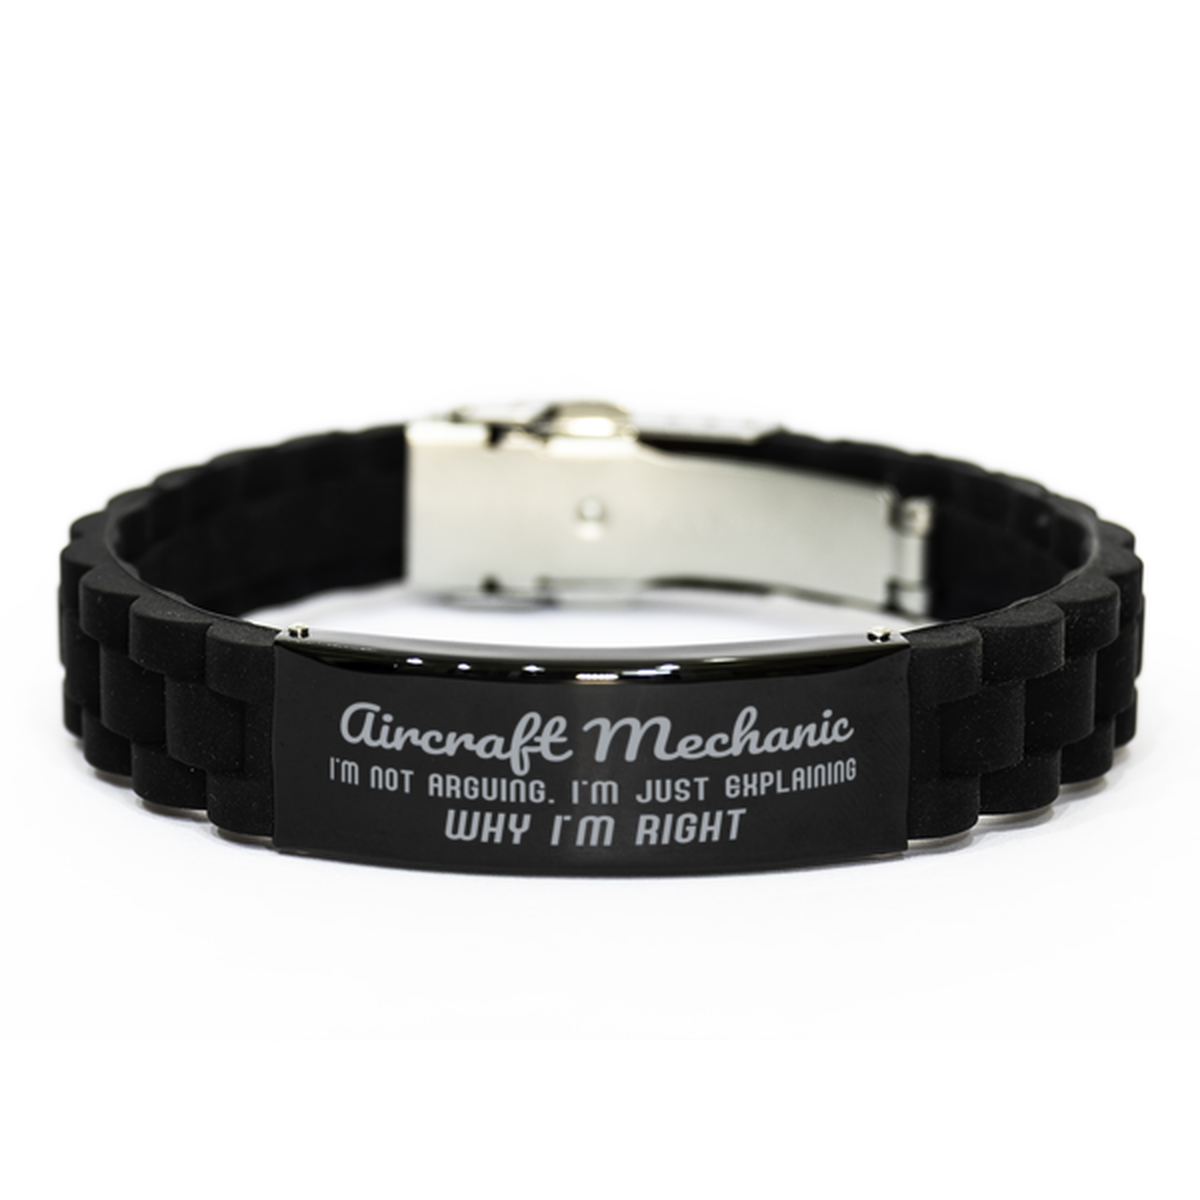 Aircraft Mechanic I'm not Arguing. I'm Just Explaining Why I'm RIGHT Black Glidelock Clasp Bracelet, Funny Saying Quote Aircraft Mechanic Gifts For Aircraft Mechanic Graduation Birthday Christmas Gifts for Men Women Coworker